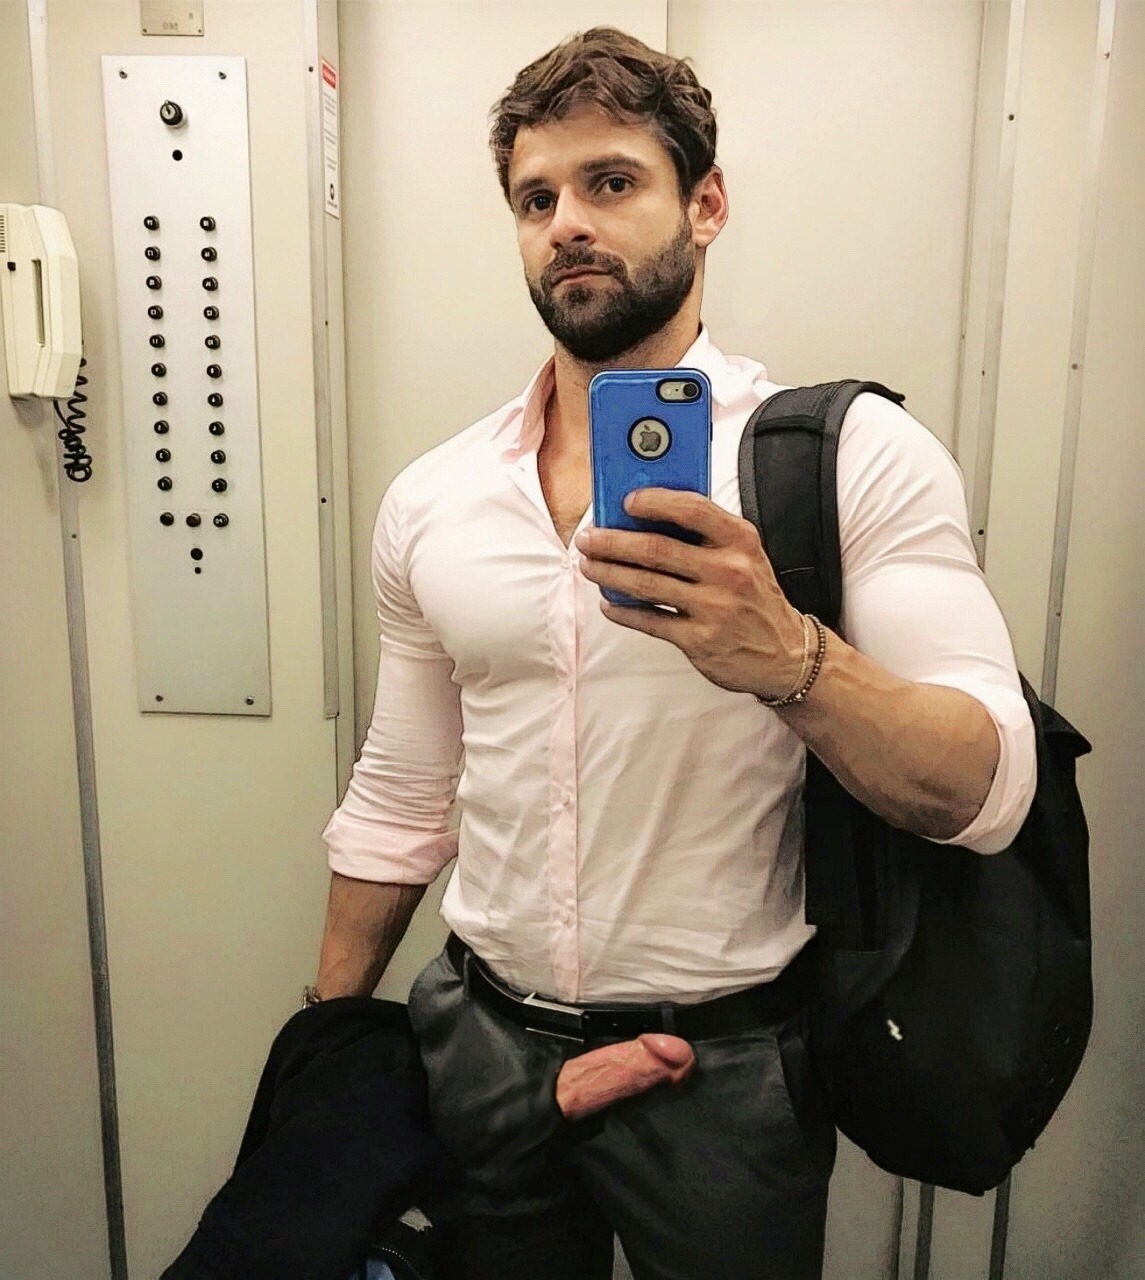 manlyparts:
“Meanwhile, at the elevator
”